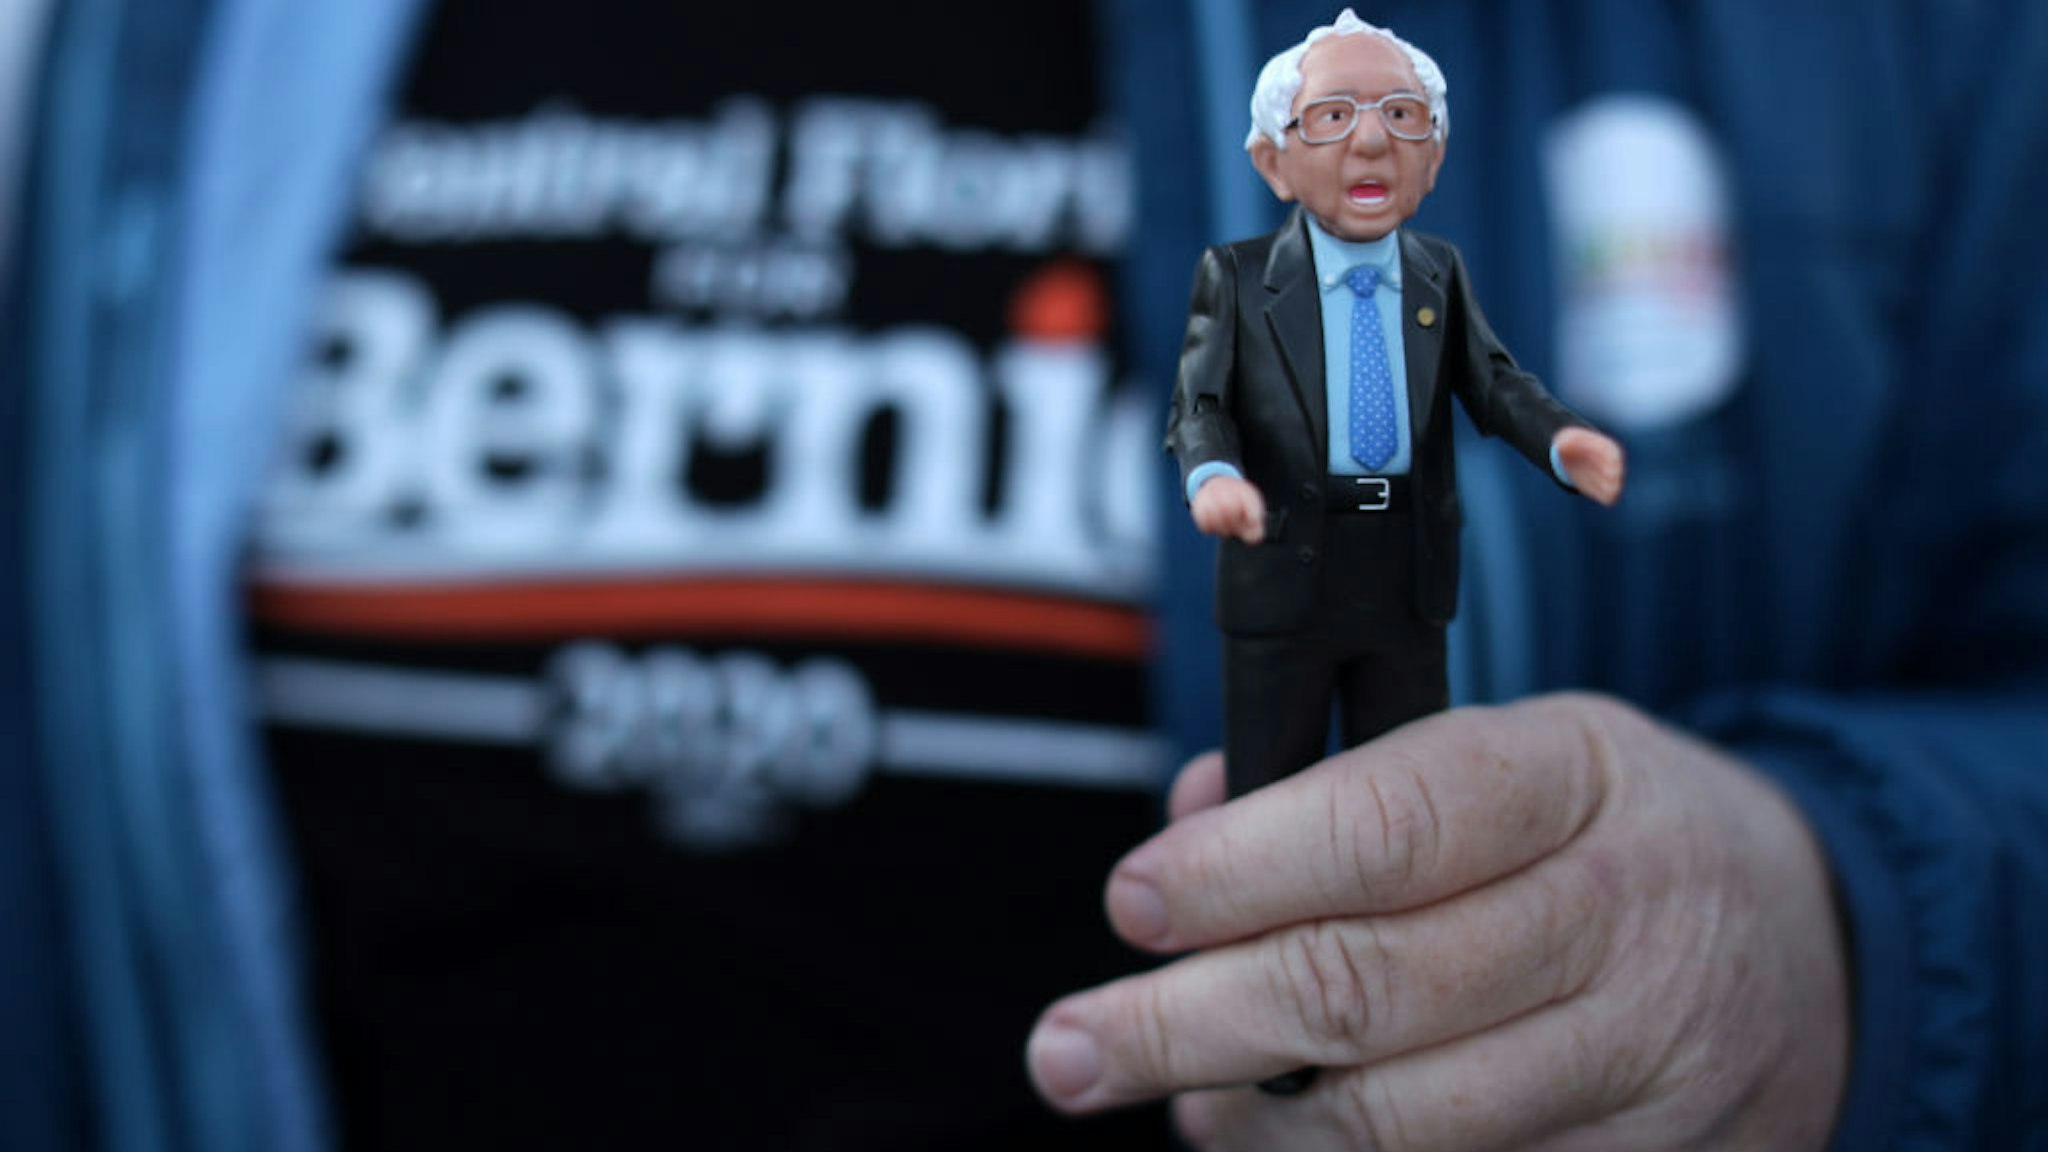 A supporter holds a Bernie action figure outside a campaign event of Democratic presidential candidate Sen. Bernie Sanders (I-VT) at Ingersoll Tap February 2, 2020 in Des Moines, Iowa. The Iowa caucuses will be held on February 3. (Photo by Alex Wong/Getty Images)